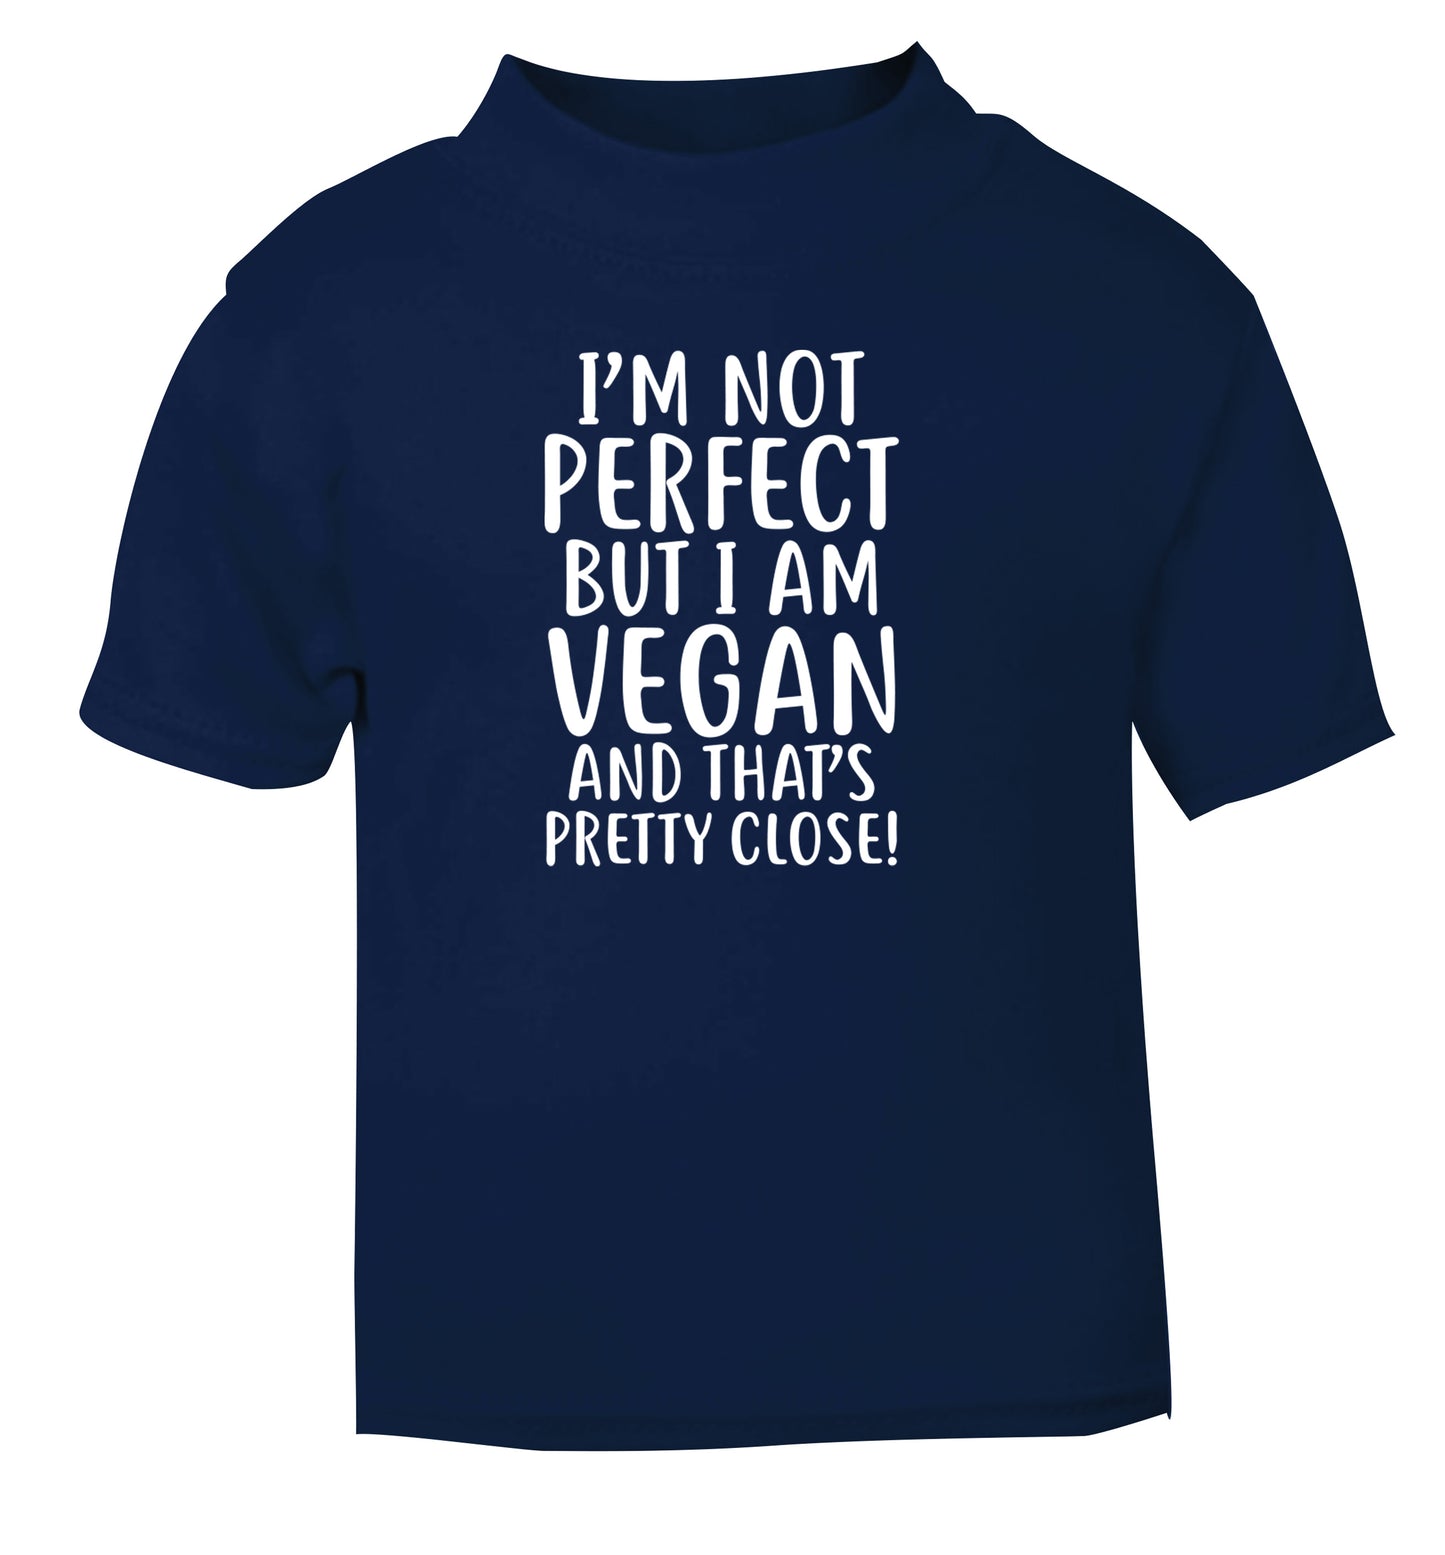 Might not be perfect but I am vegan navy Baby Toddler Tshirt 2 Years